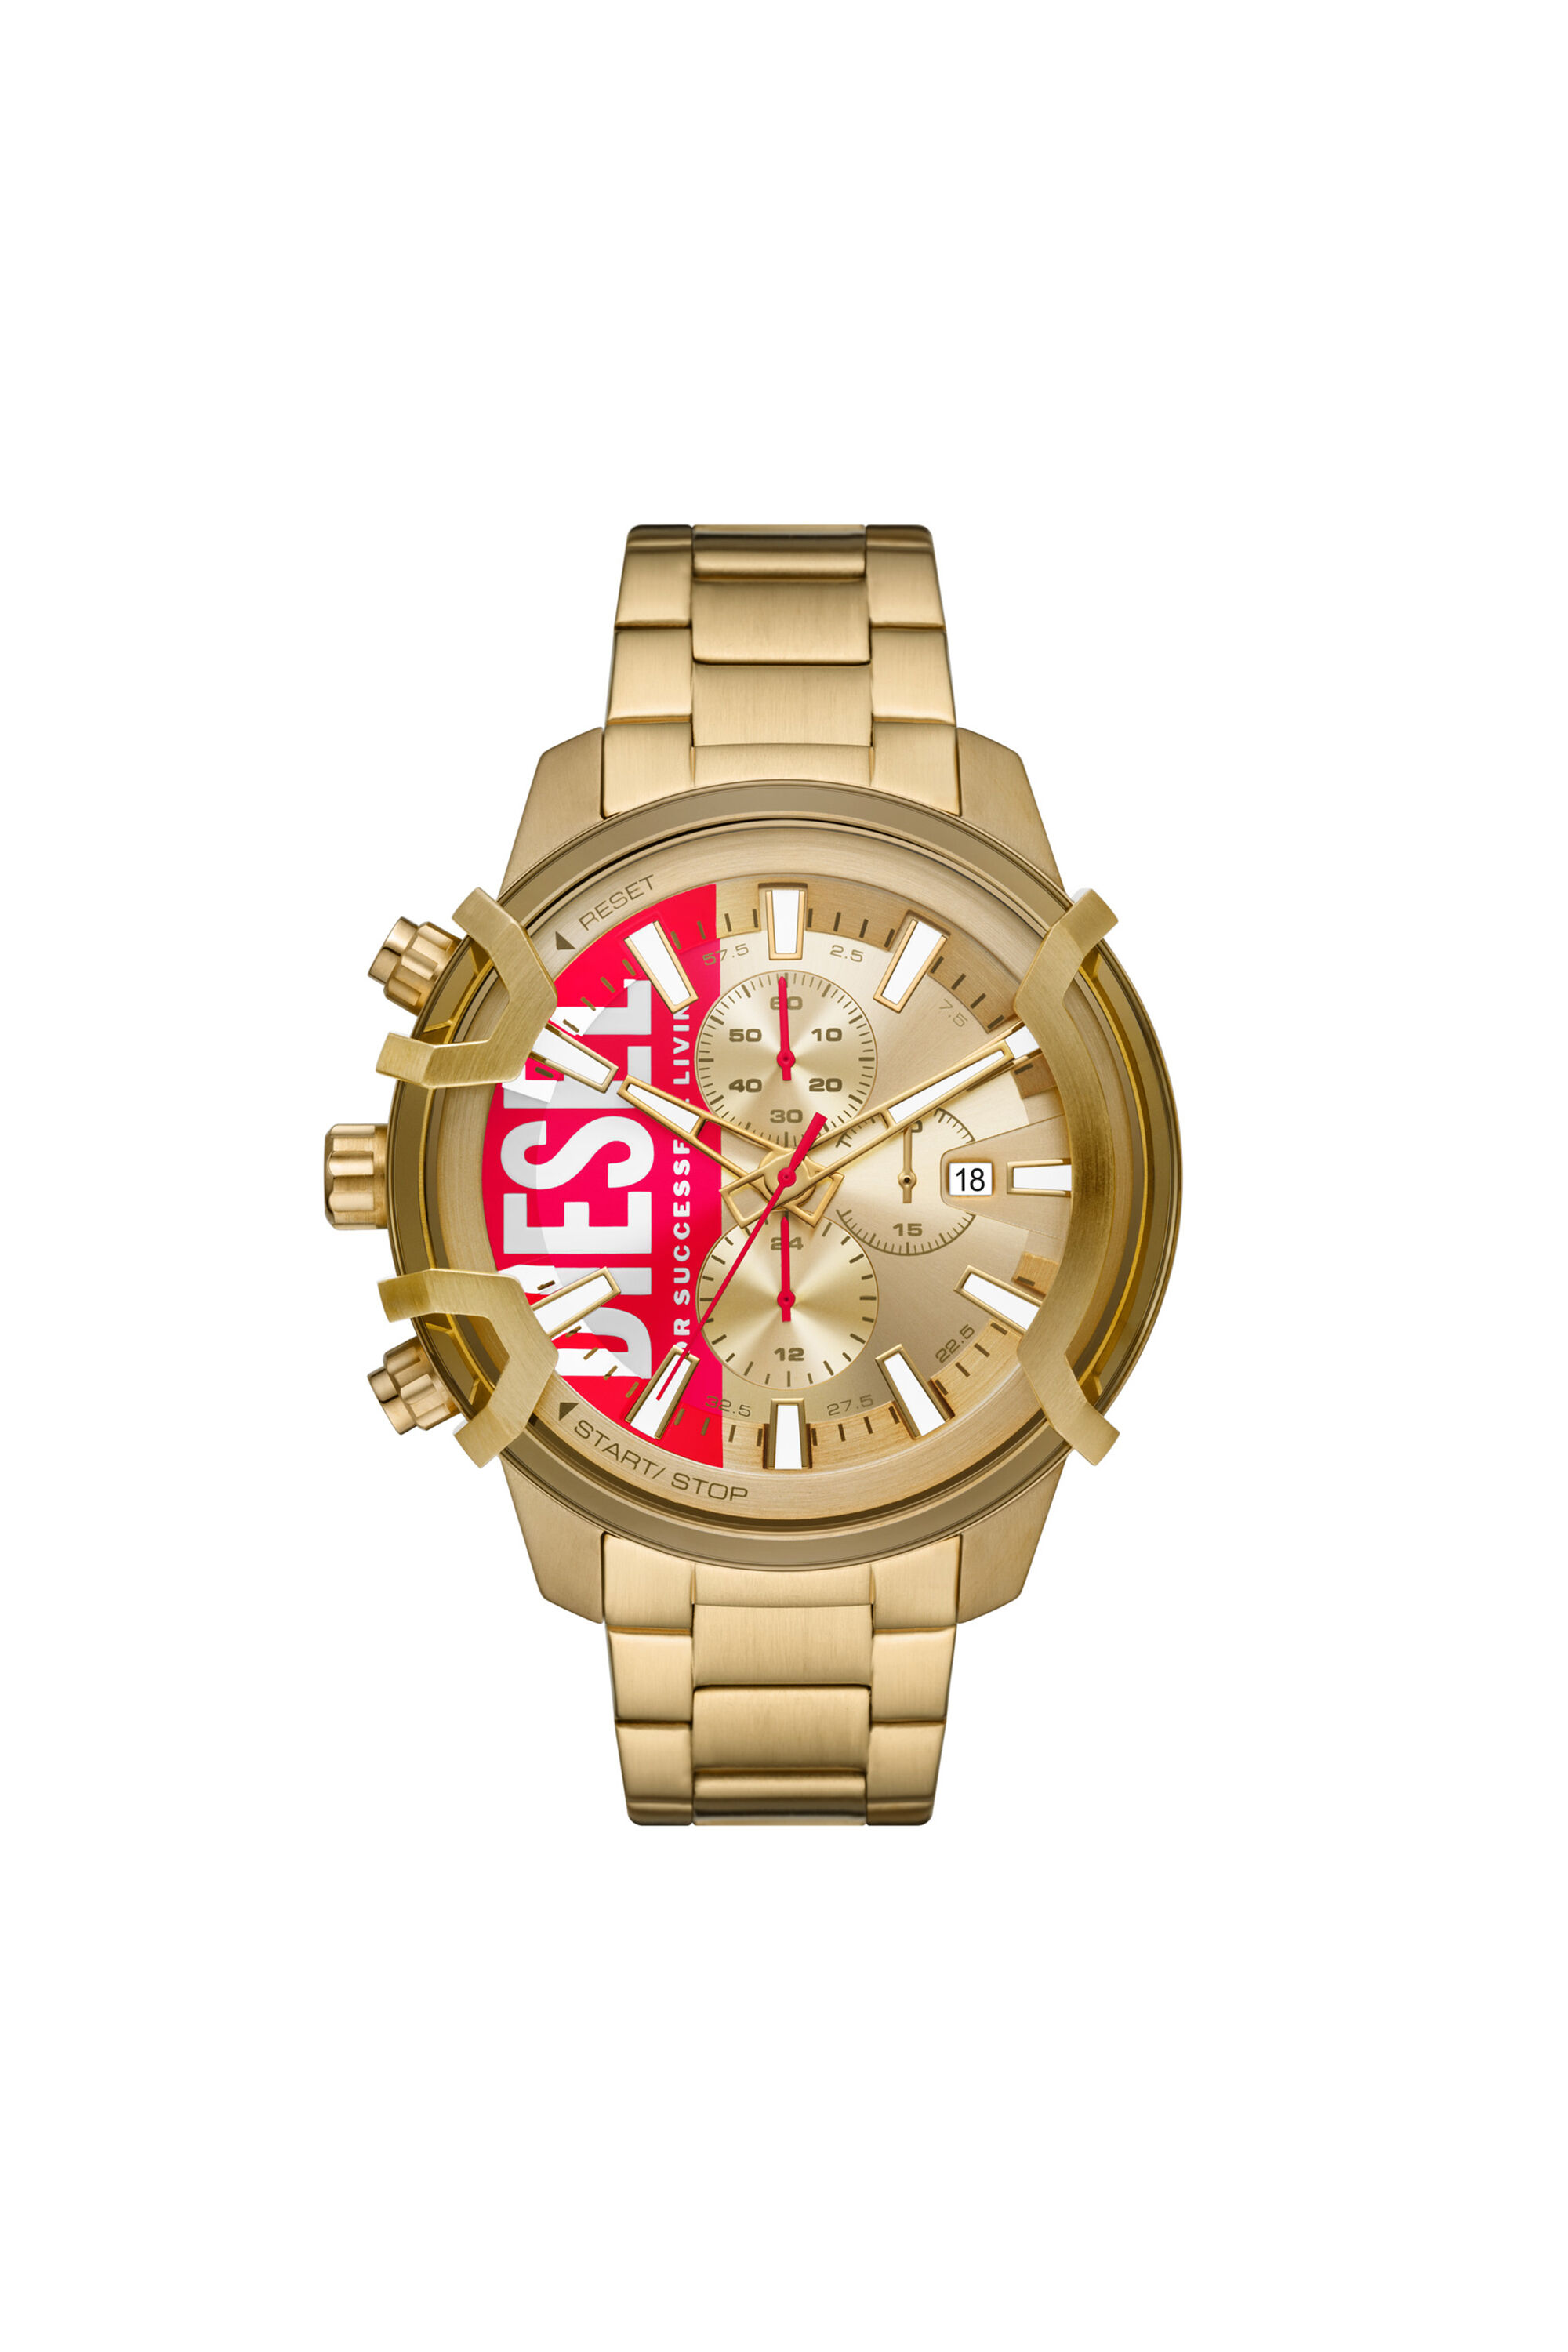 DZ4595: Men's gold-colored steel chronograph | Diesel Griffed